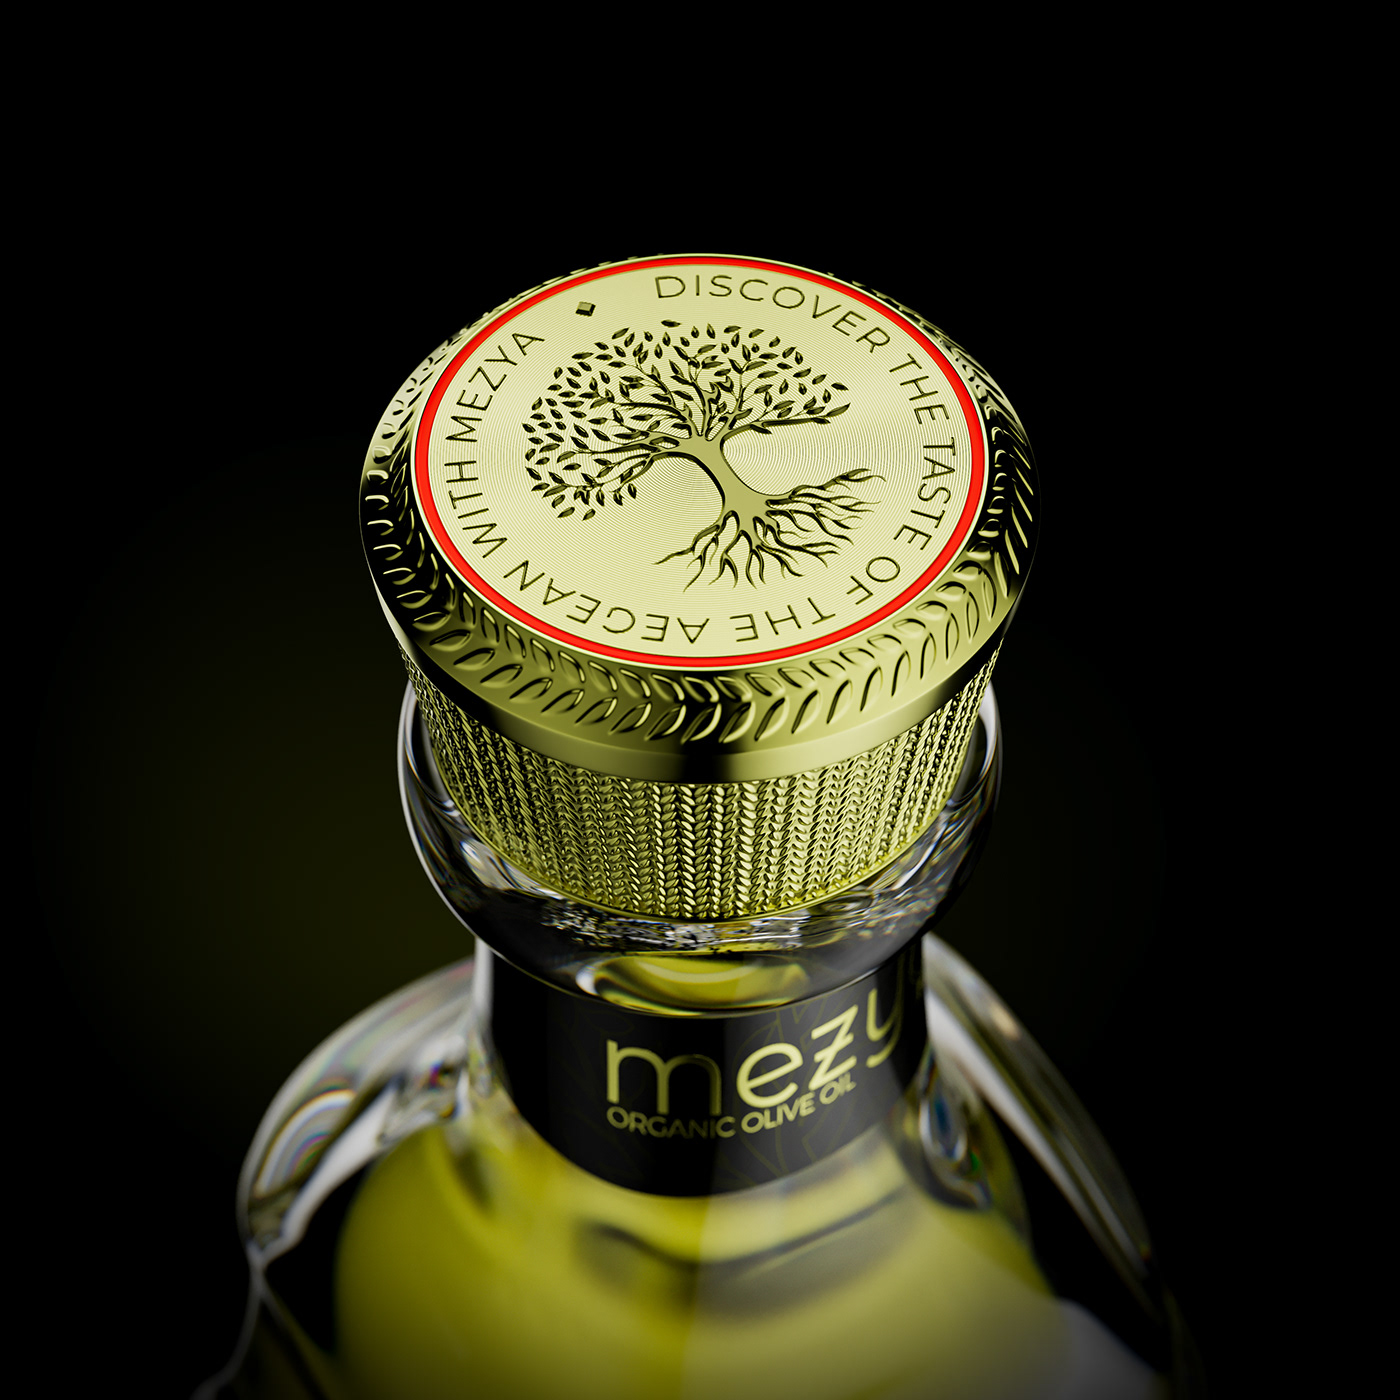 3D Render bottle Packaging CGI Food  Photography  oliveoil oliveoilpackaging